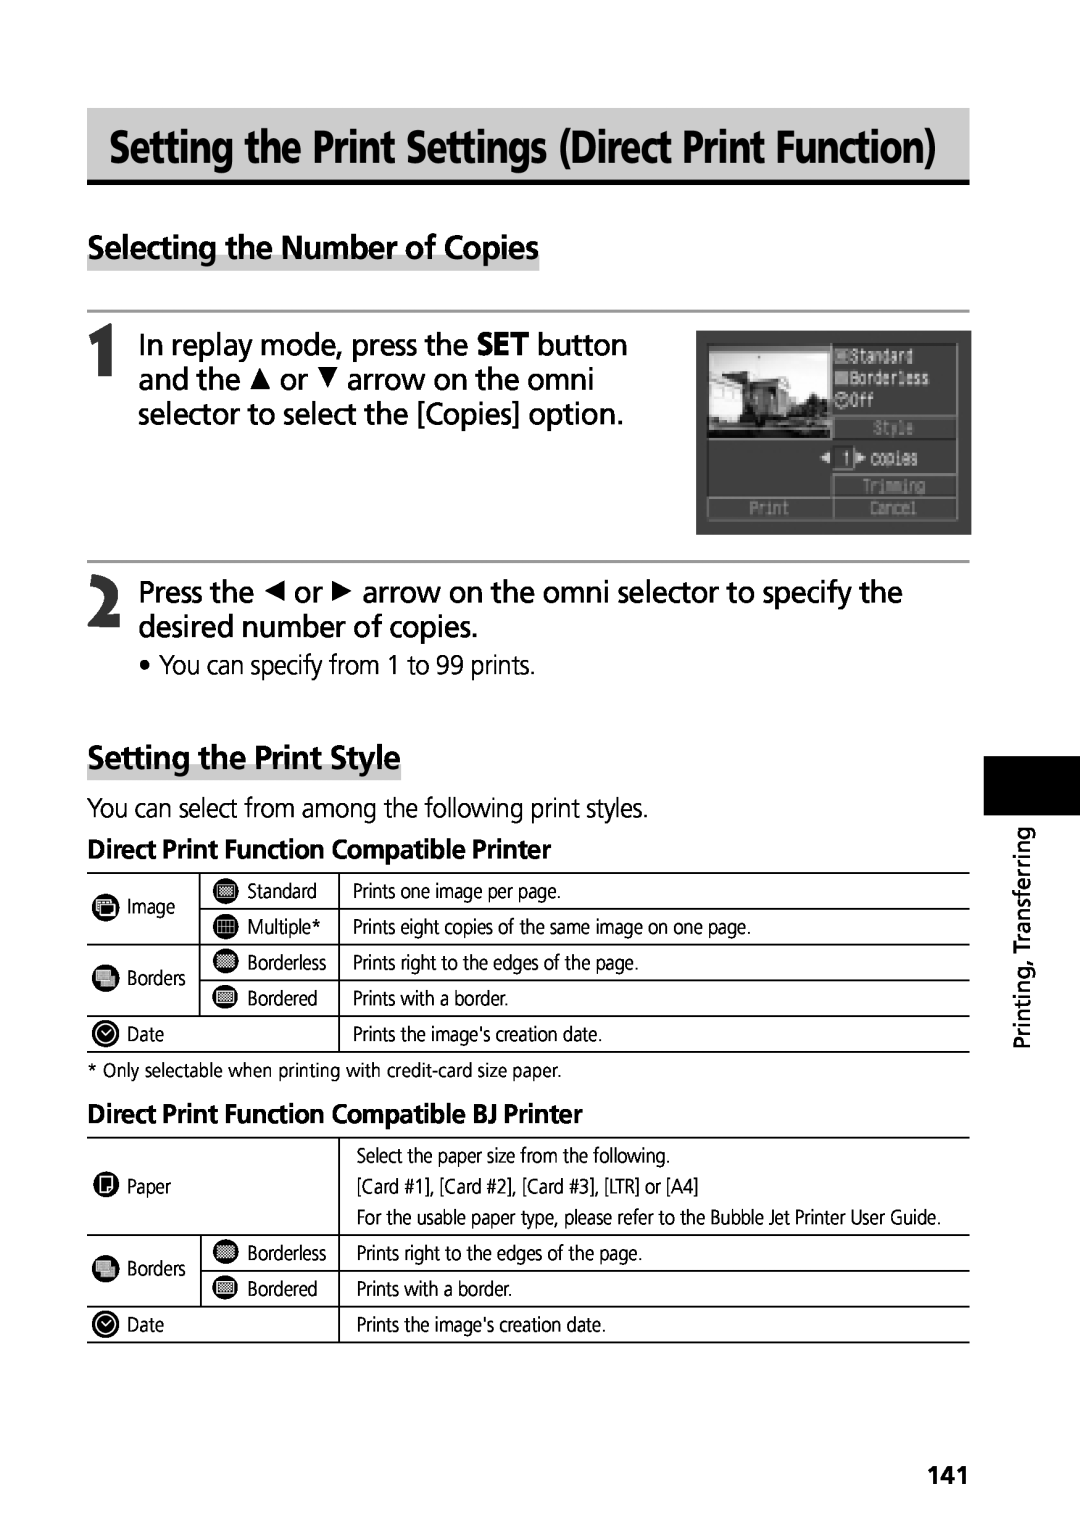 Canon G3 manual Setting the Print Settings Direct Print Function, Selecting the Number of Copies, Setting the Print Style 